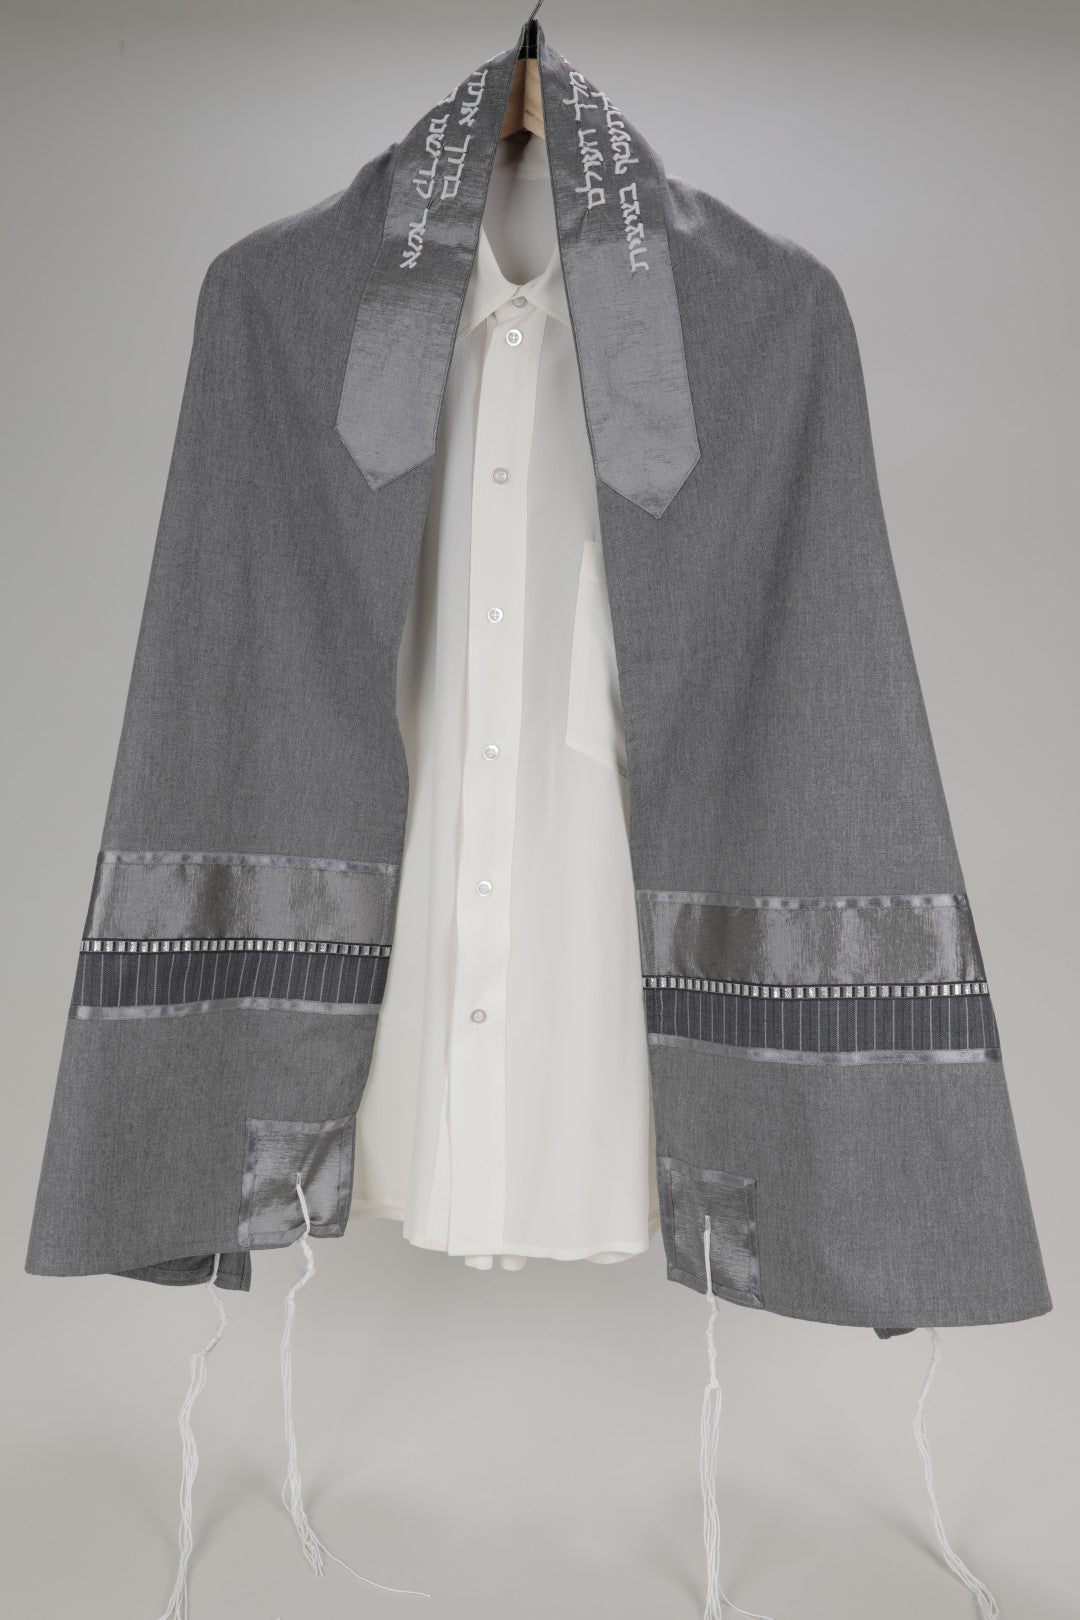 DISTINGUISHED GRAY TALLIT WITH SILVER TRIMMING